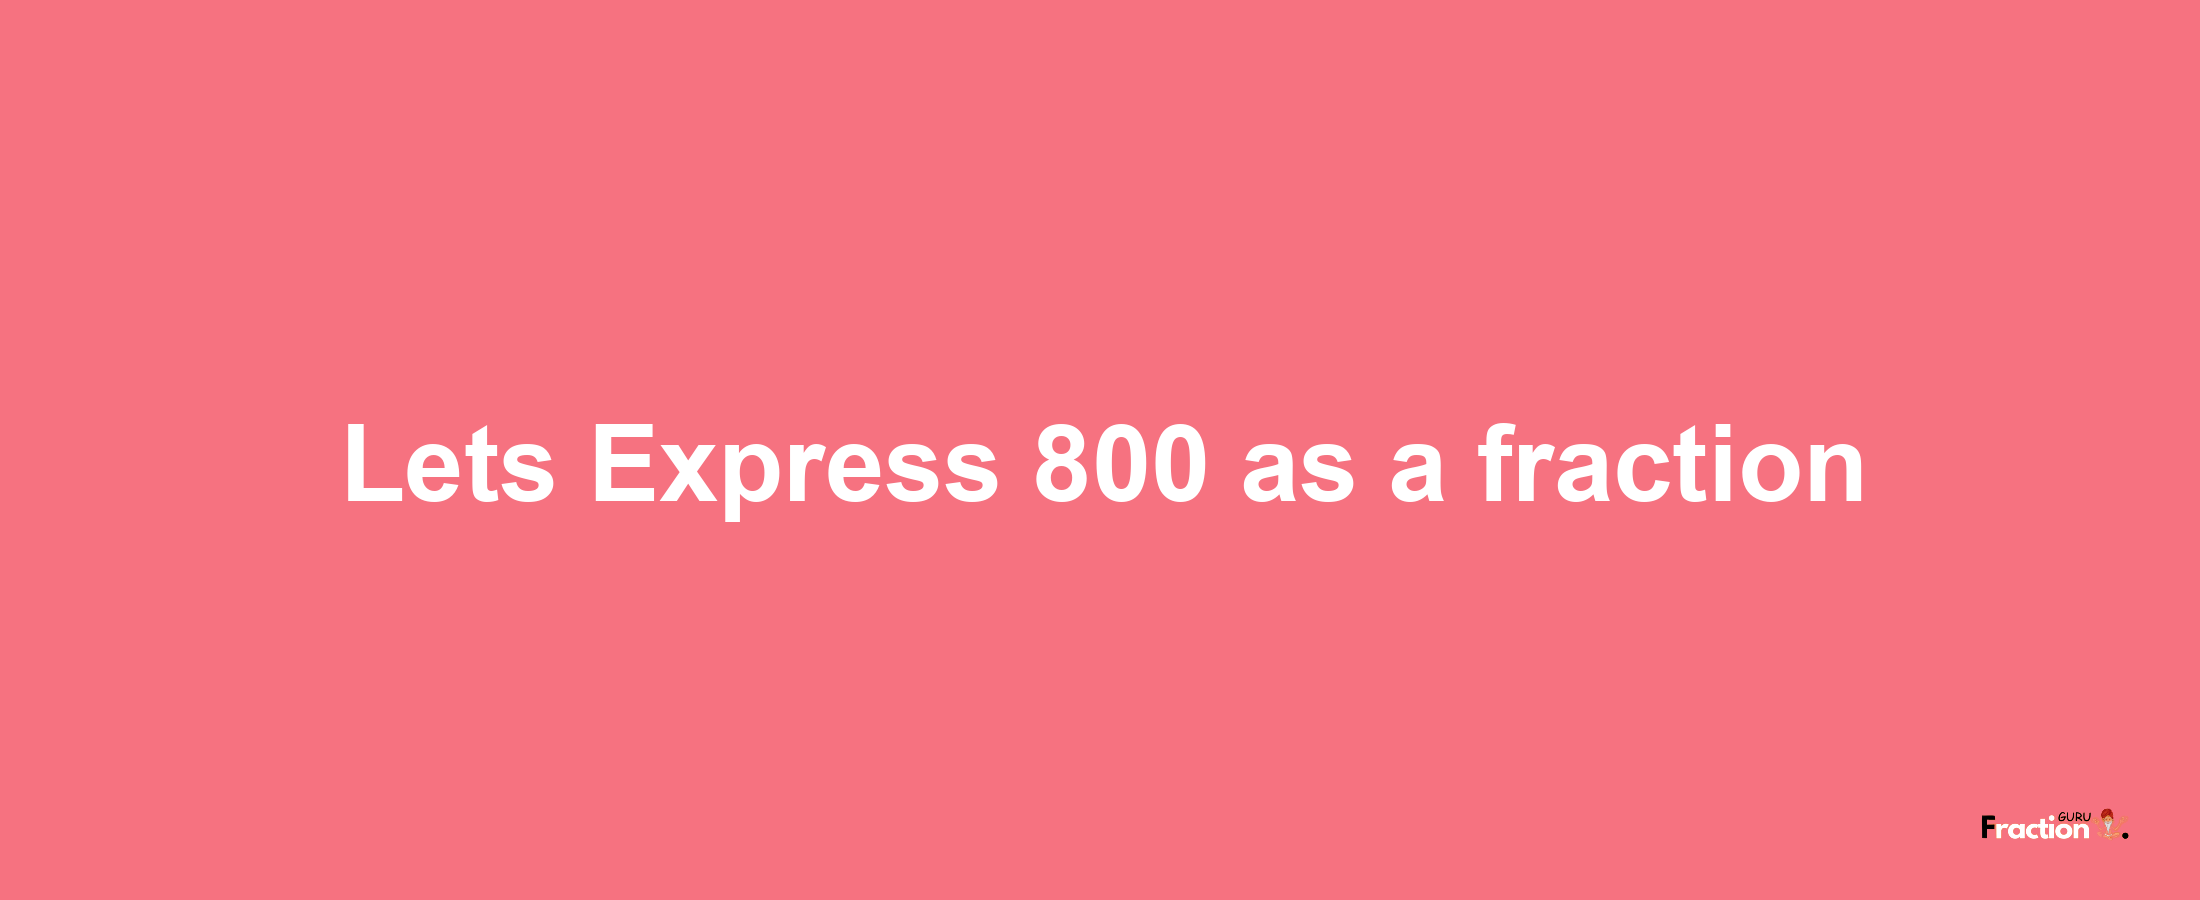 Lets Express 800 as afraction